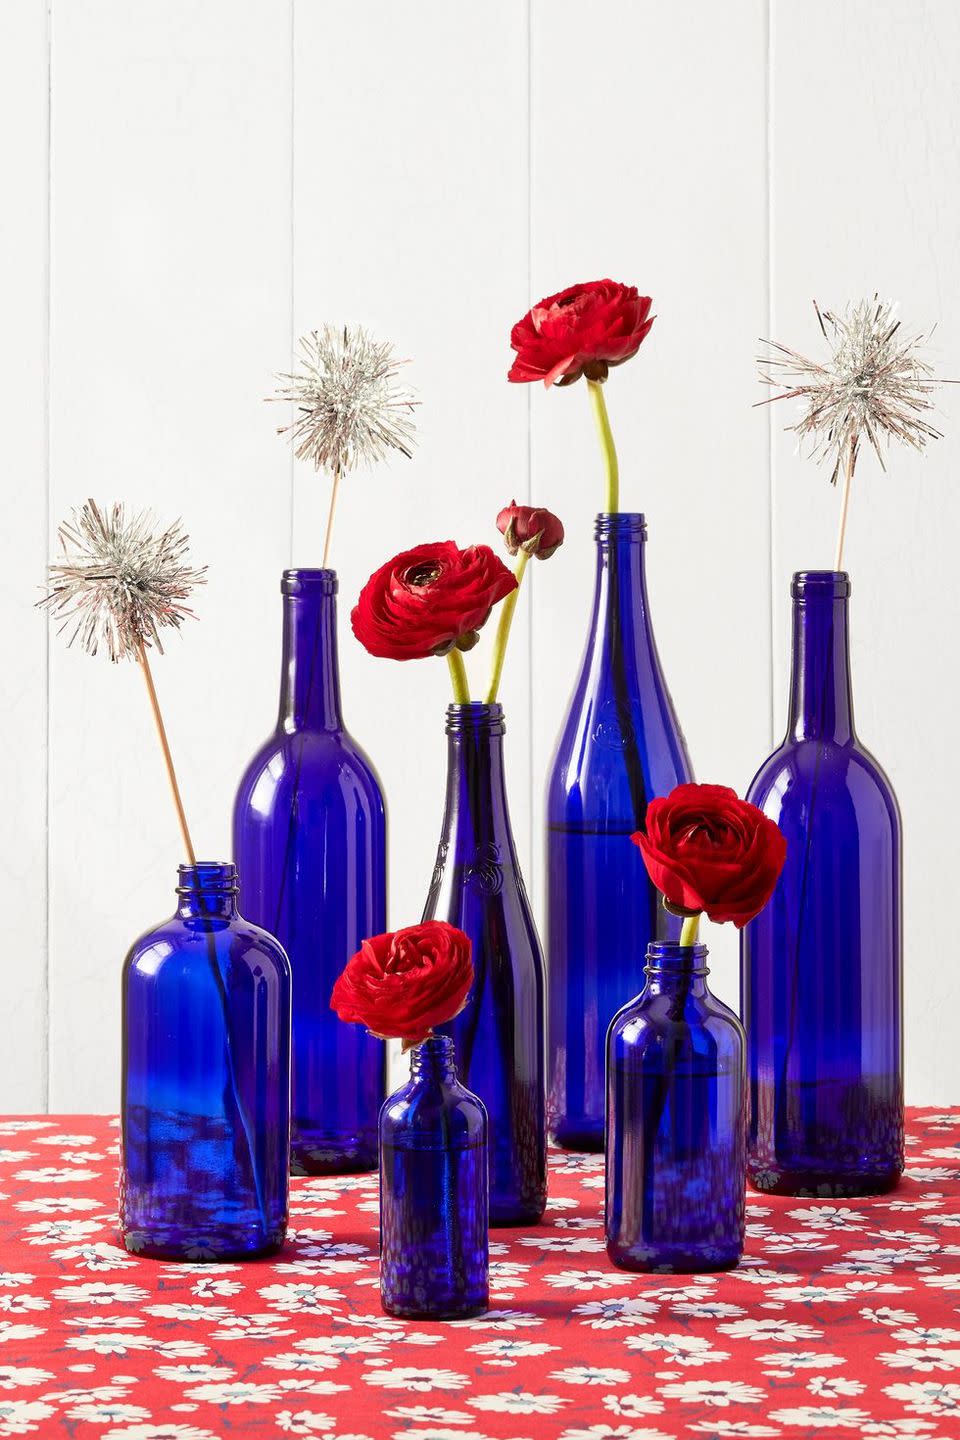 Upgrade your décor game by upcycling.